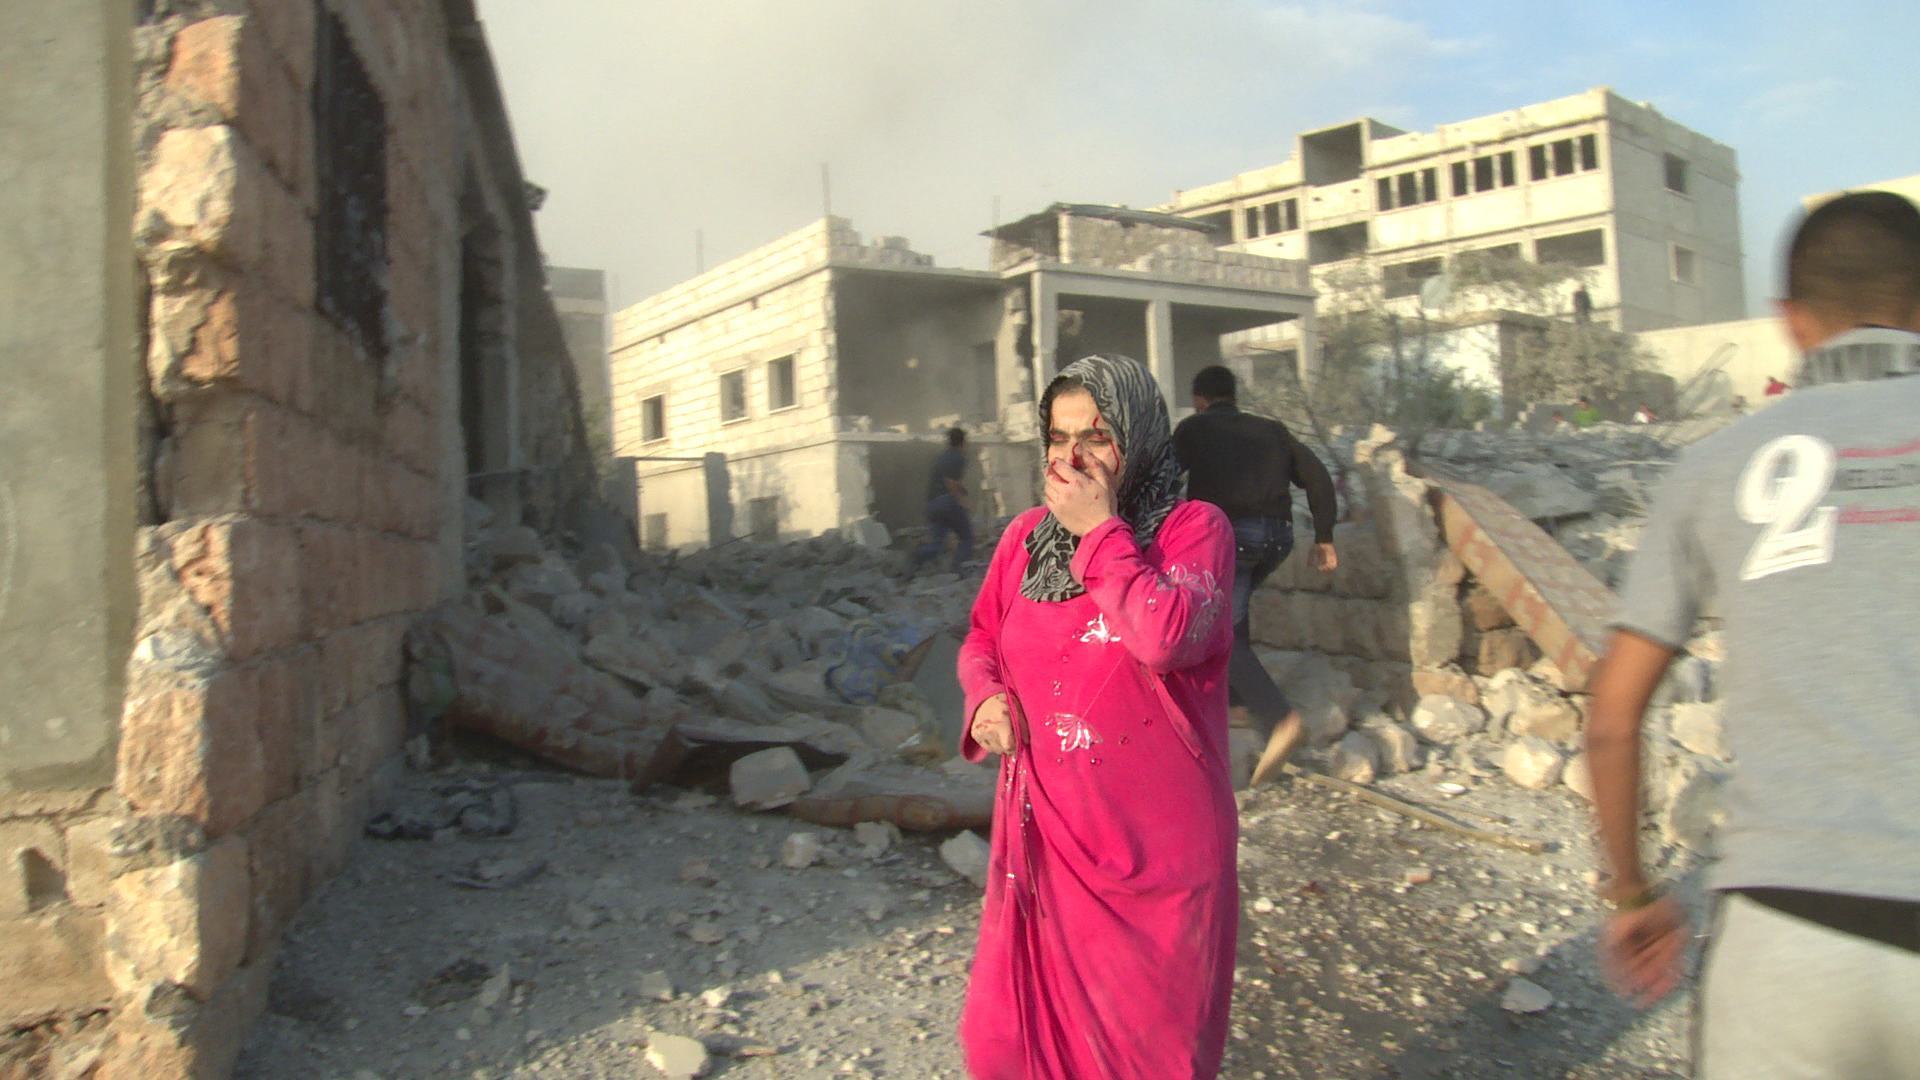 Families emerge from the rubble after an air strike in the Sunni village of Al Barra, October 2012  1